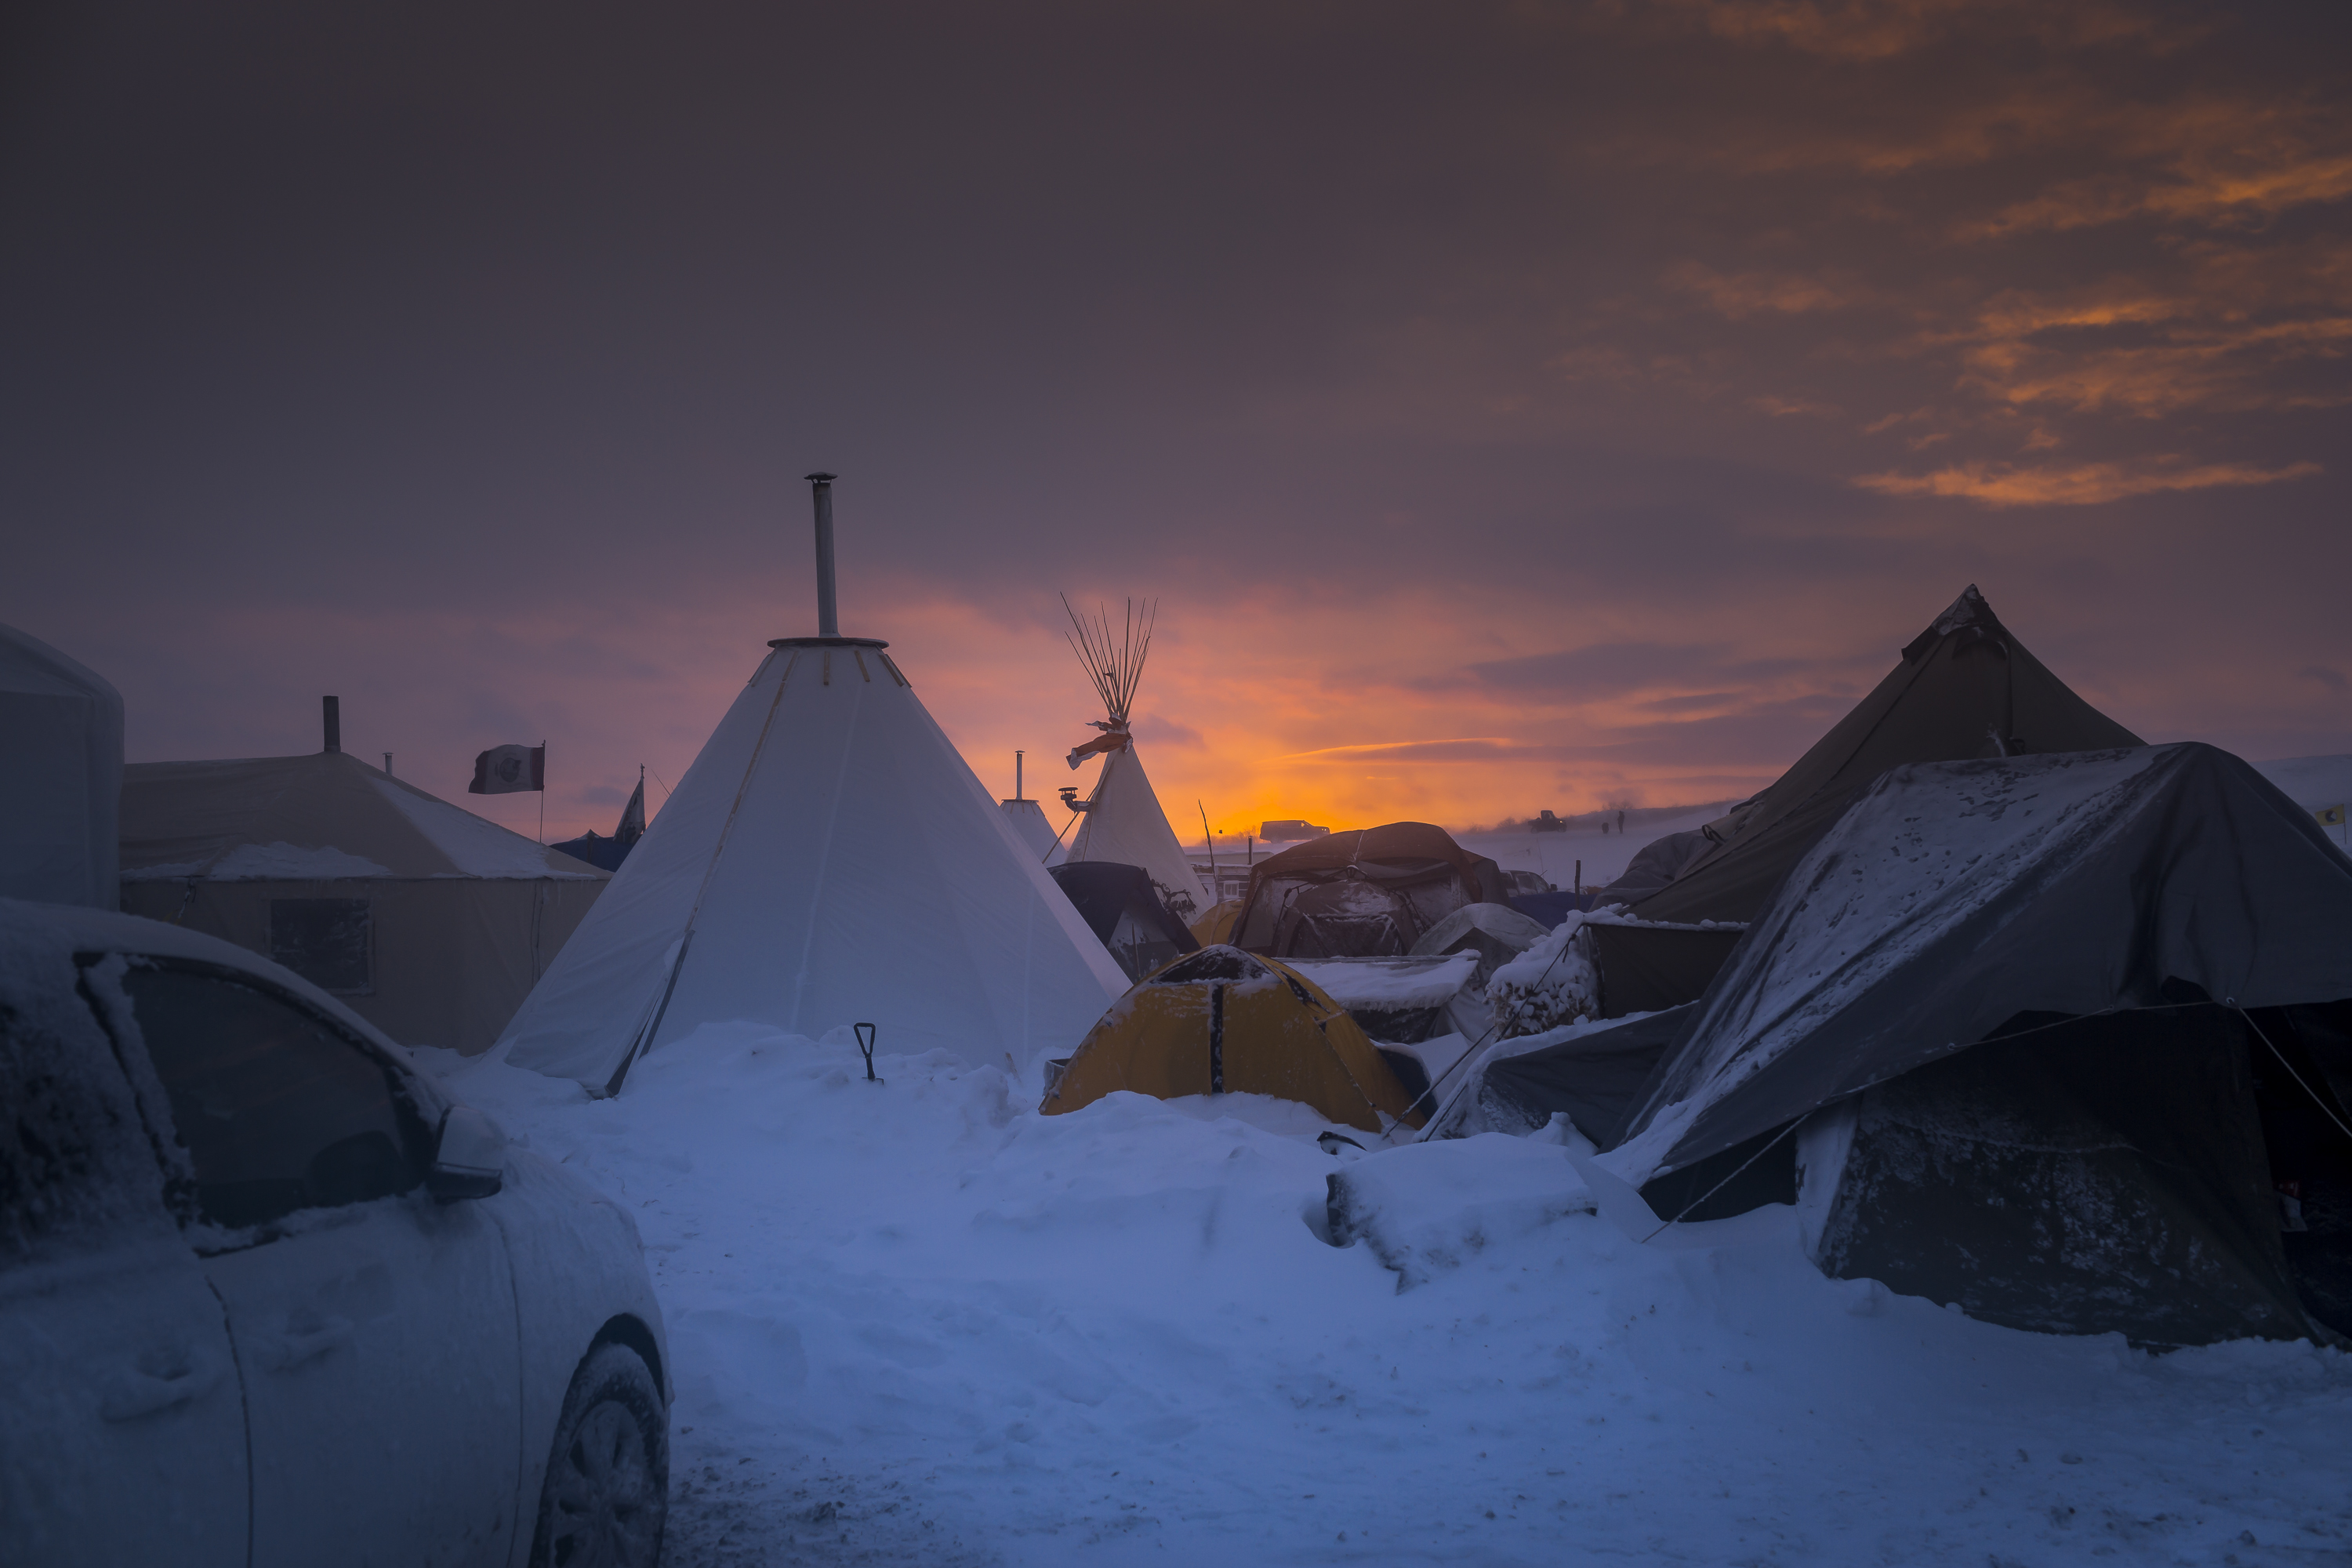 Winter has arrived in Standing Rock at the Oceti Sakowin